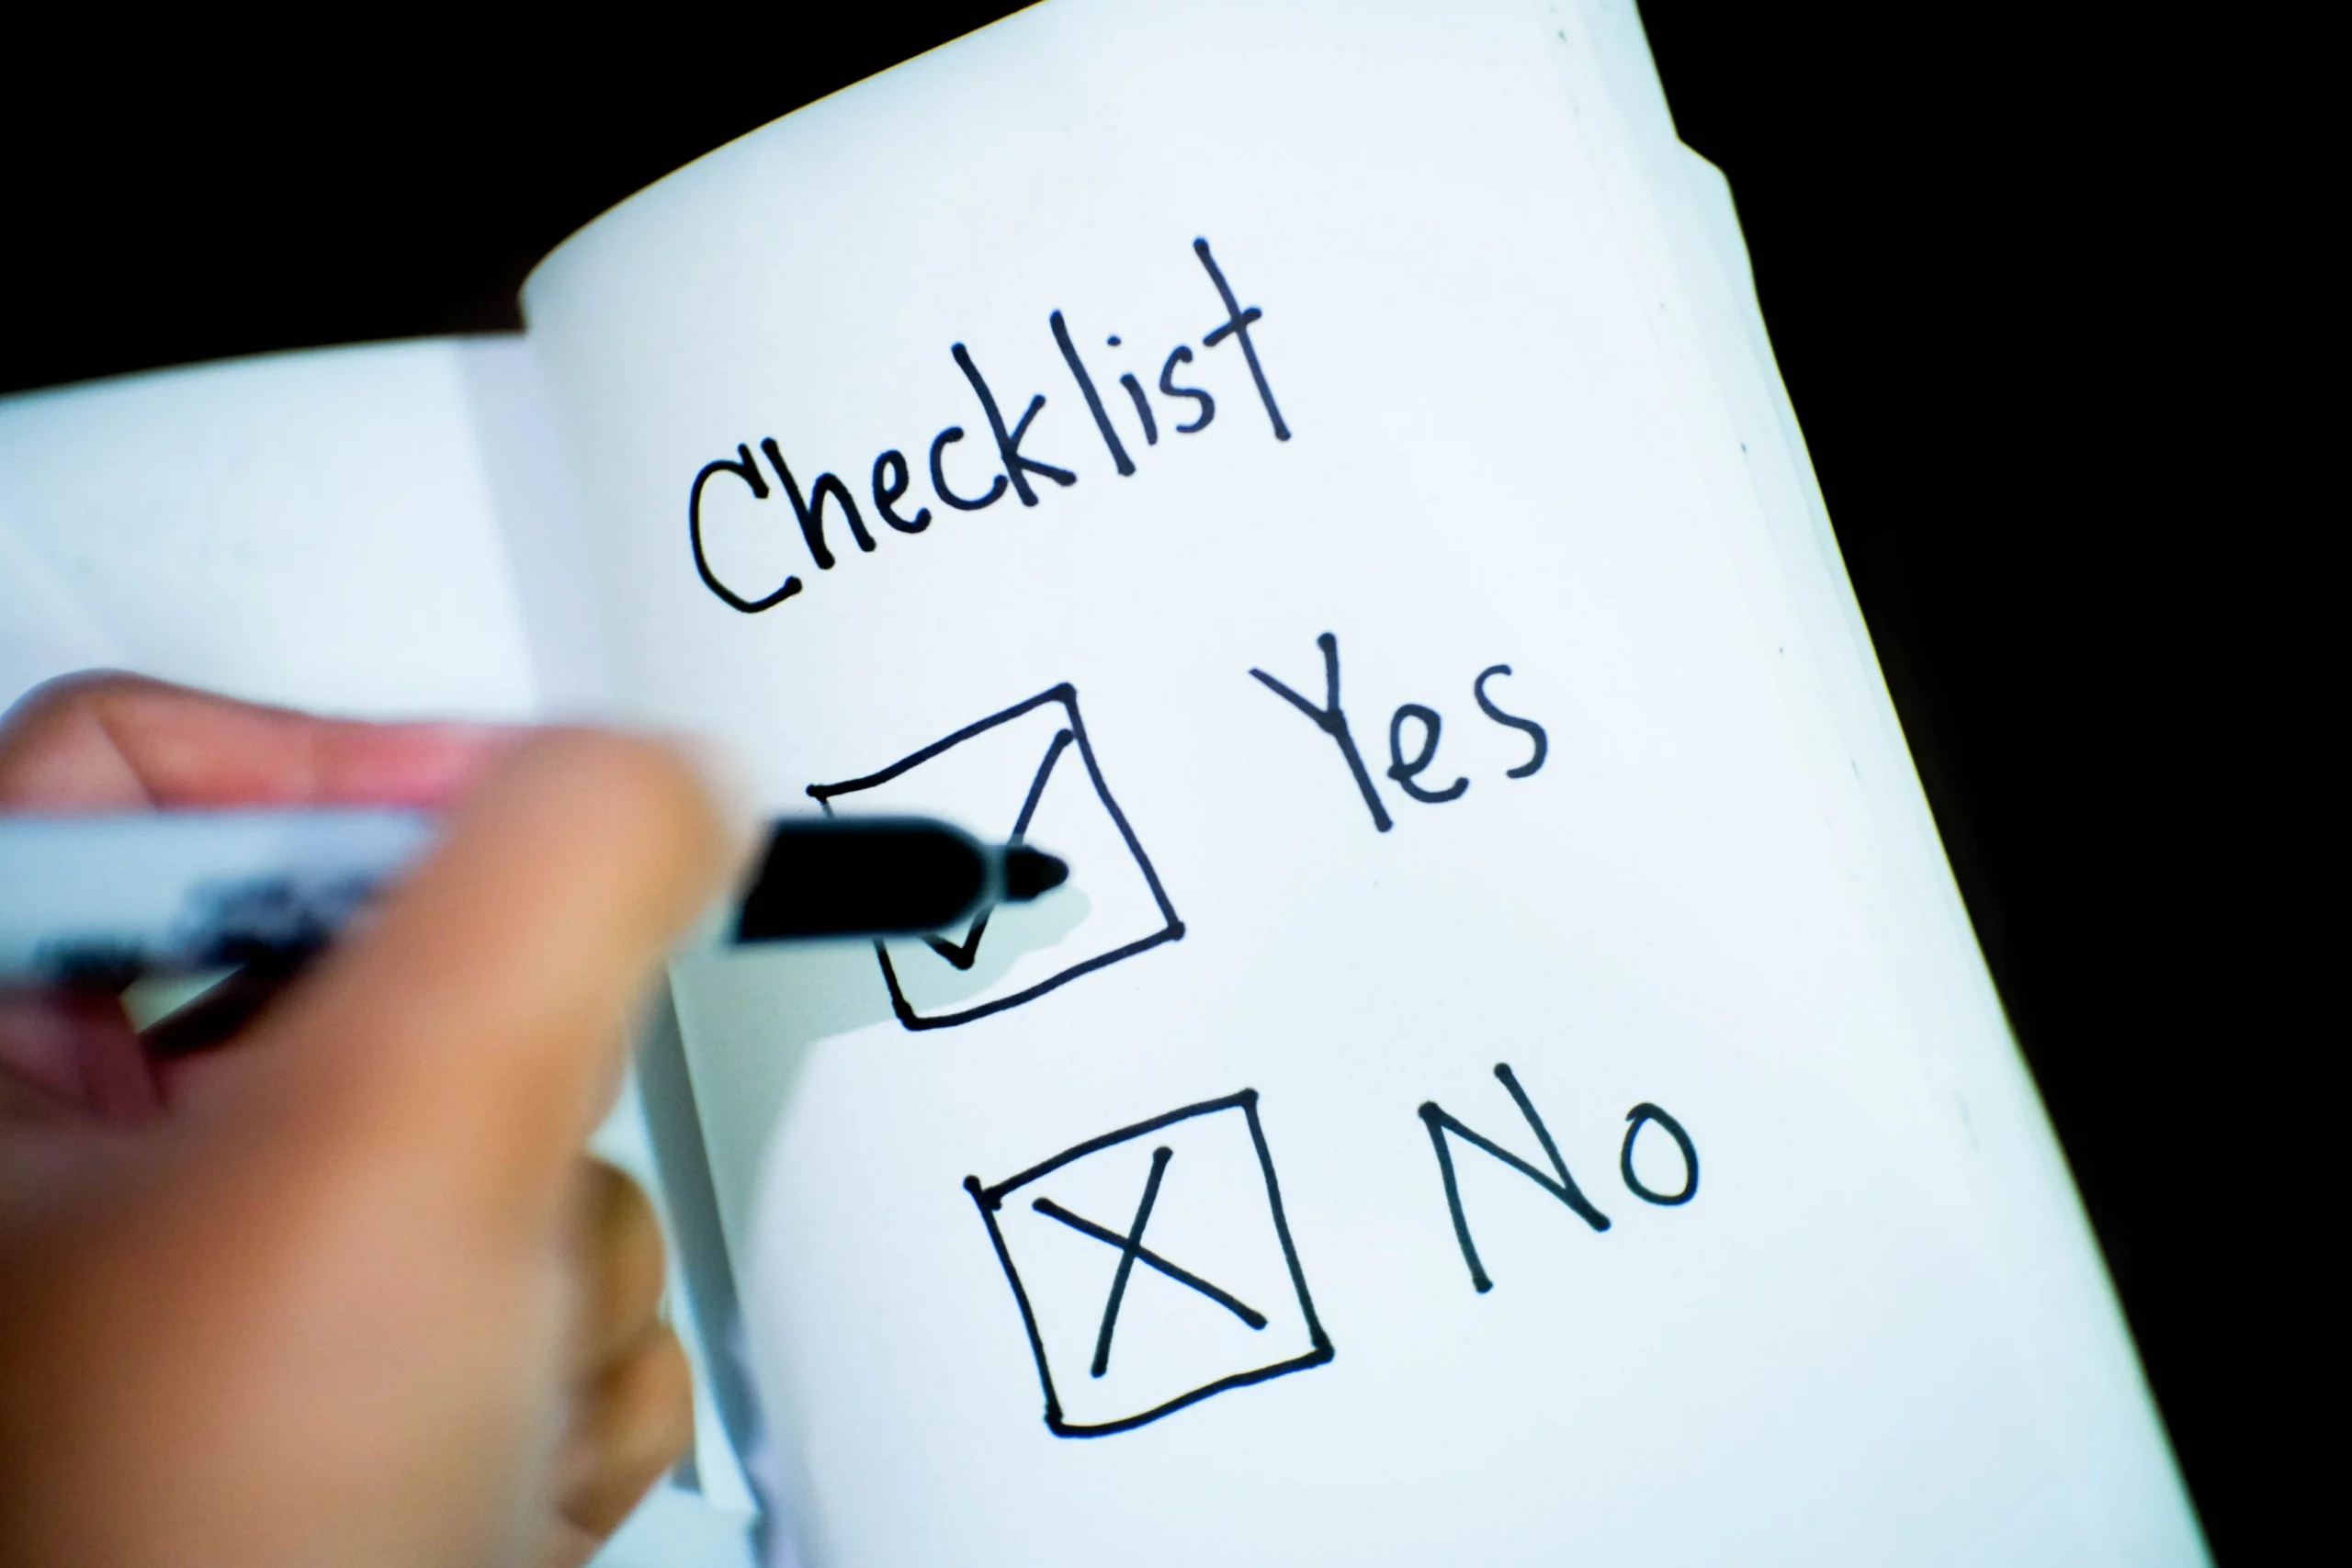 Safety checklist every home should have